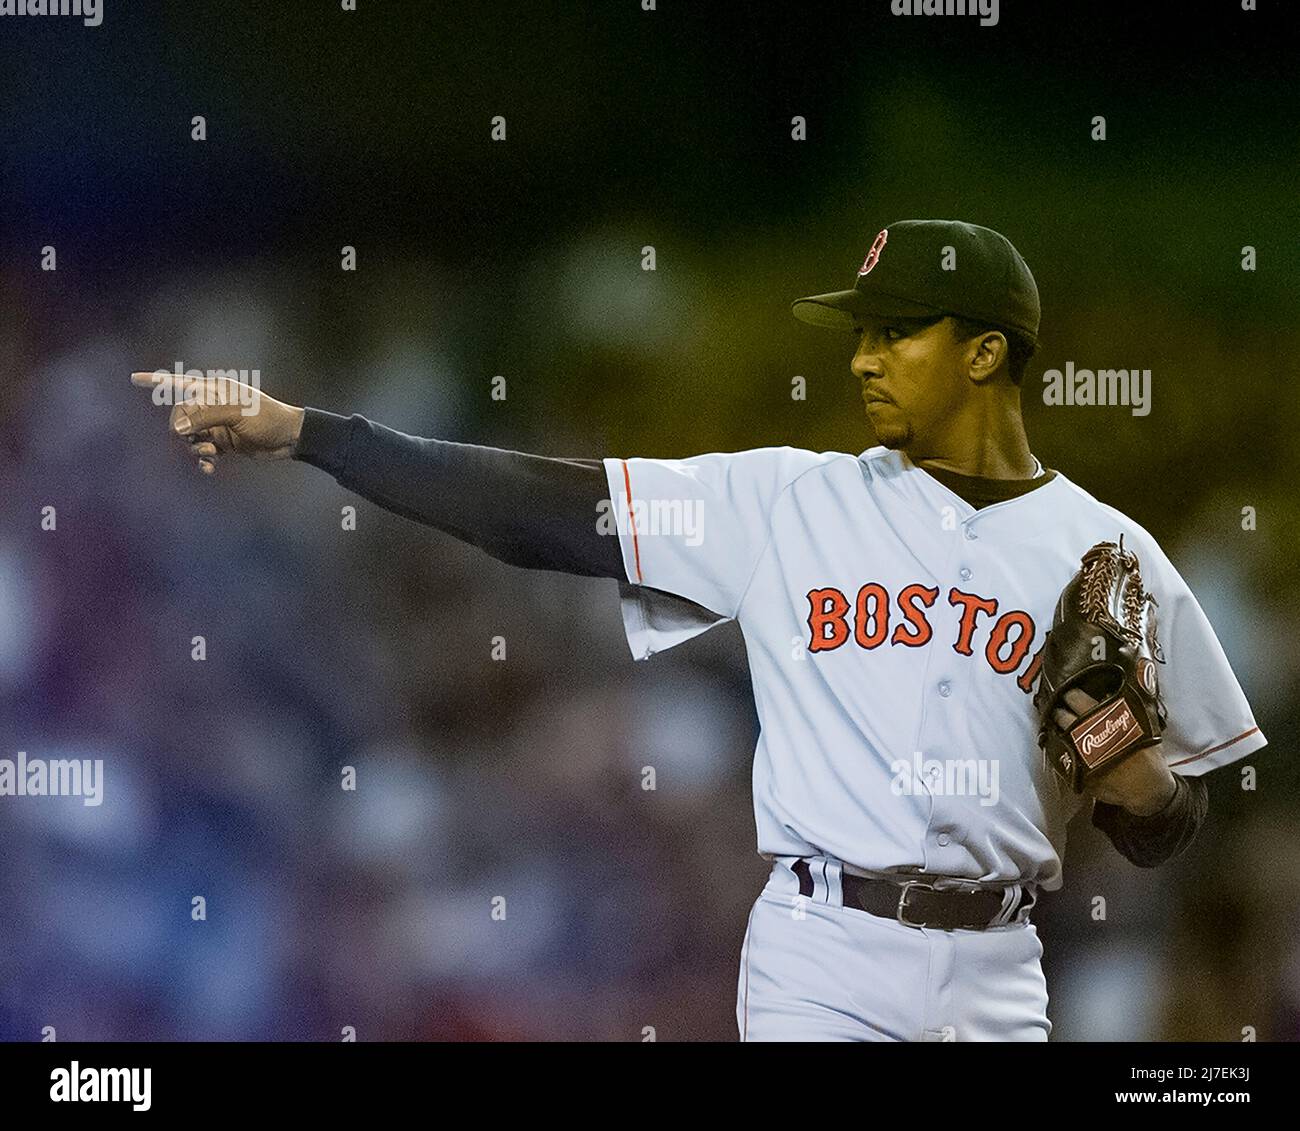 Boston Red Sox pitcher Pedro Martinez points during  a game against the New York Yankees on May 28, 2000 in New York. Photo credit: Francis Specker Stock Photo